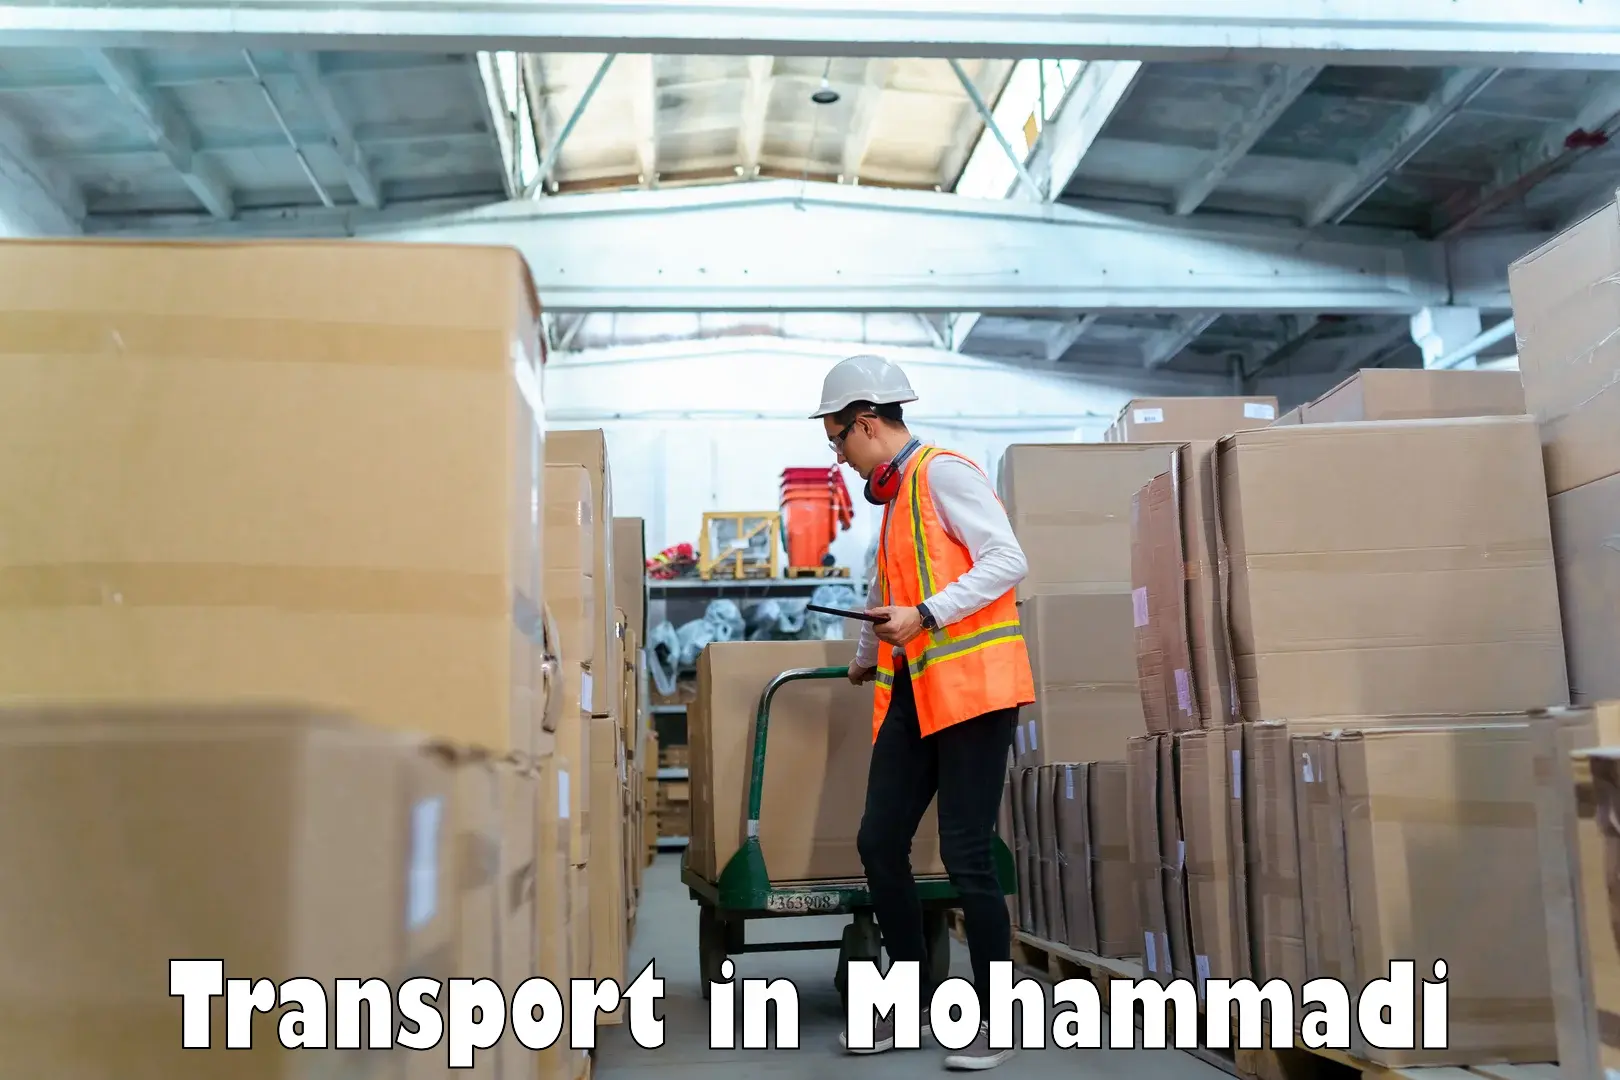 Container transport service in Mohammadi